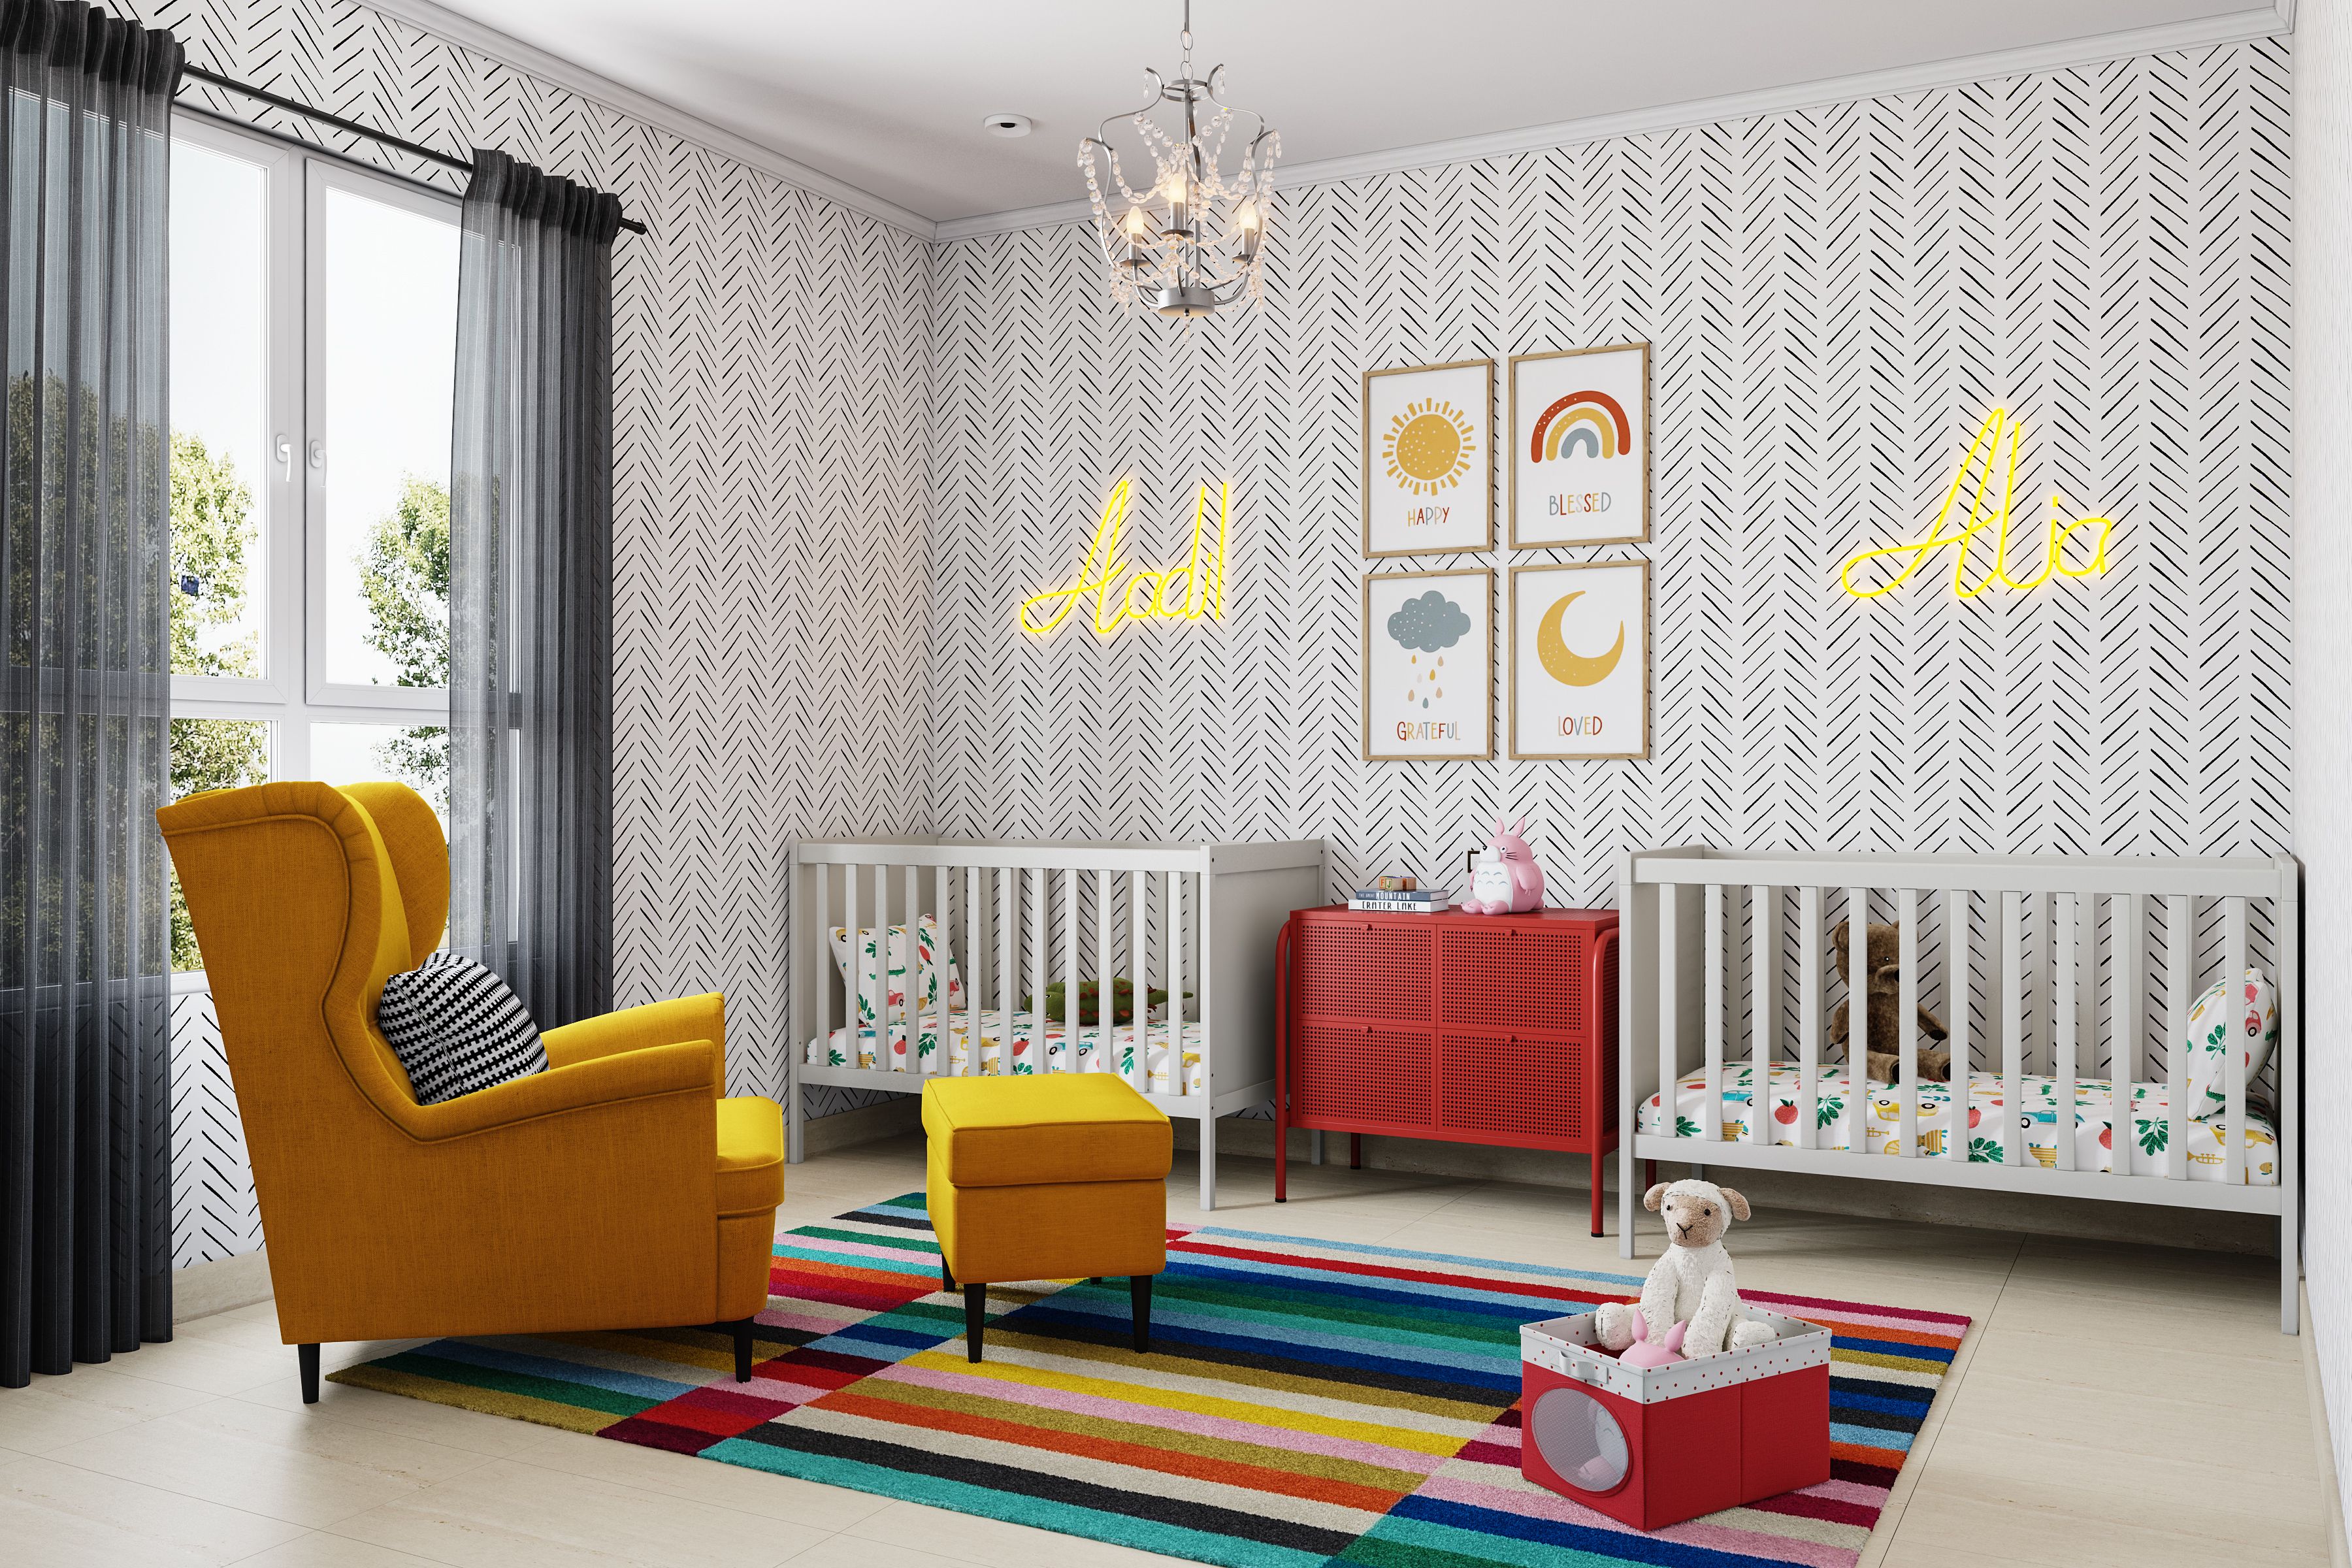 Elegant Kid's Bedroom Design With Twin Cradles And Colourful Furniture